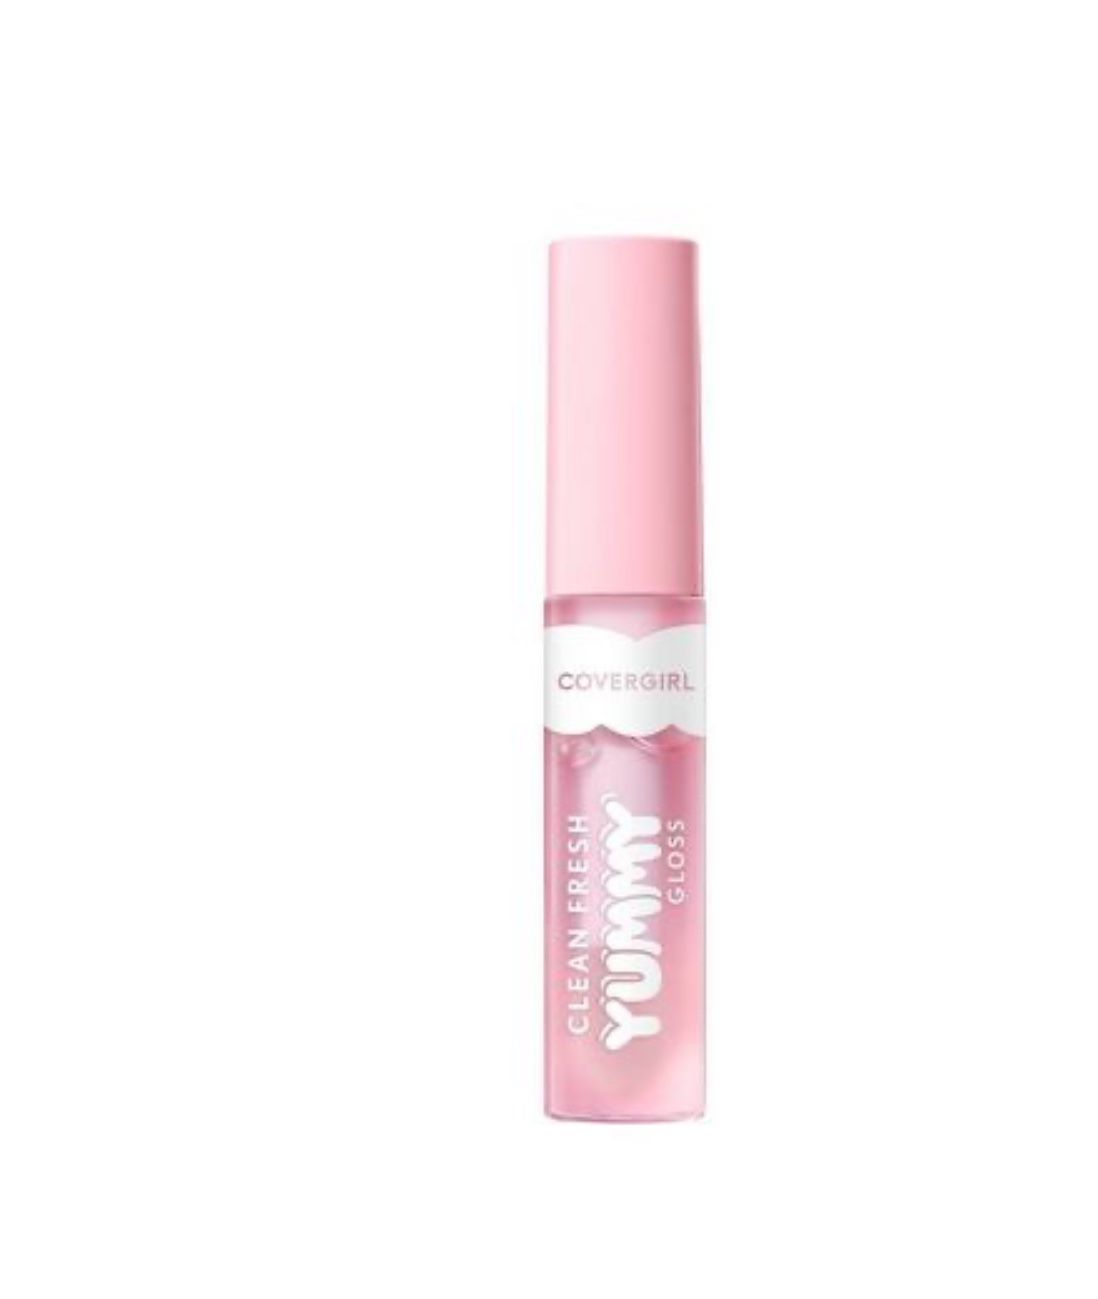 COVERGIRL “New” Yummy Lip Gloss DayLight Collection 